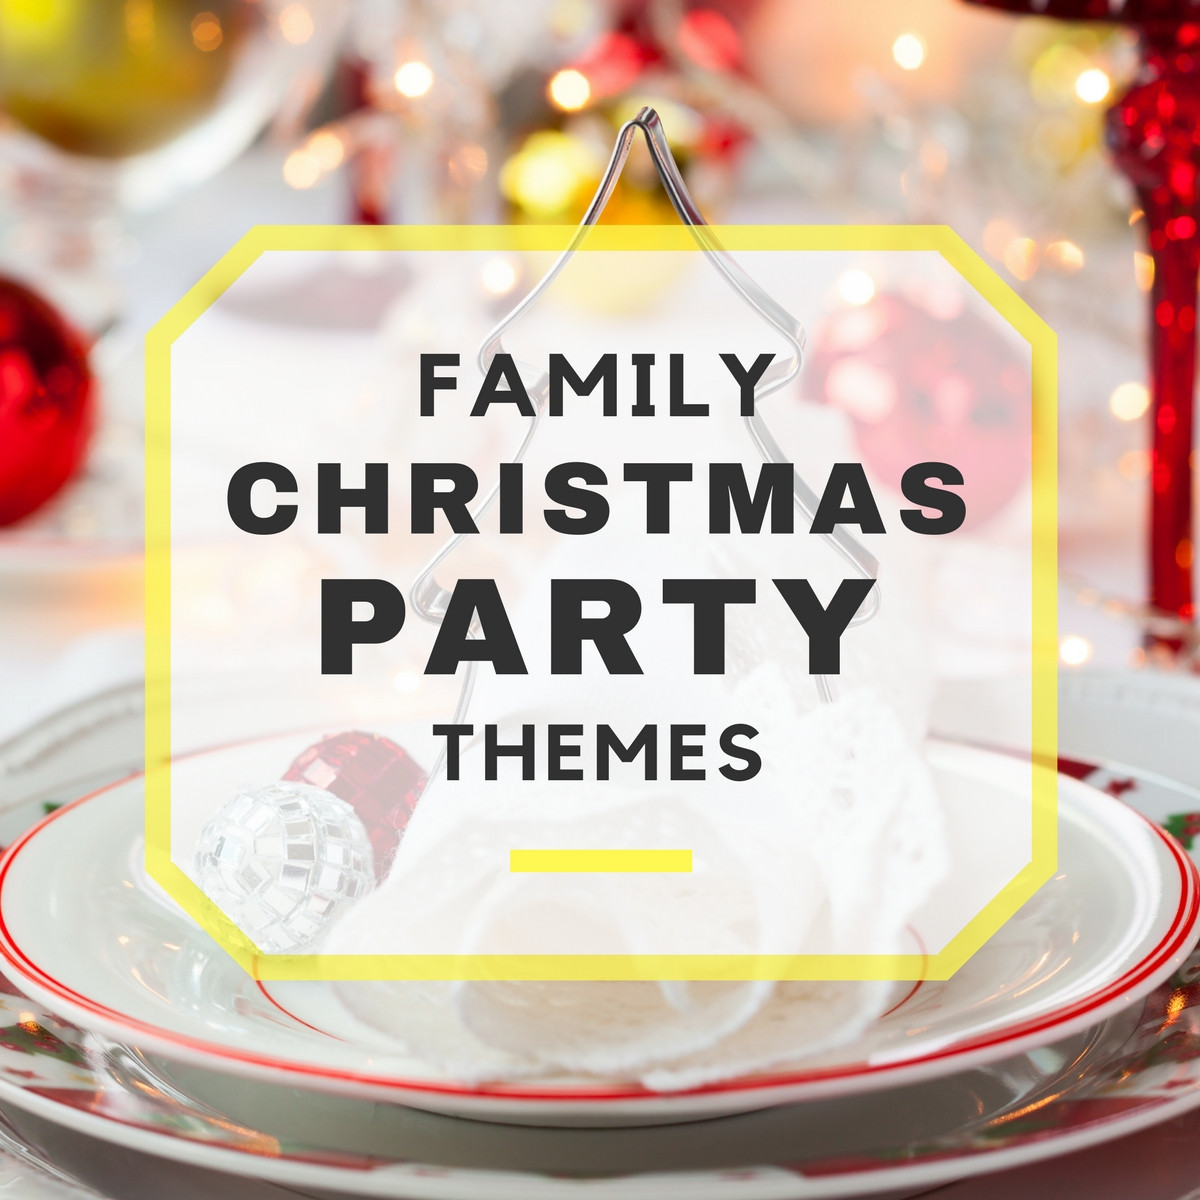 Family Christmas Party Ideas
 Family Christmas Party Themes